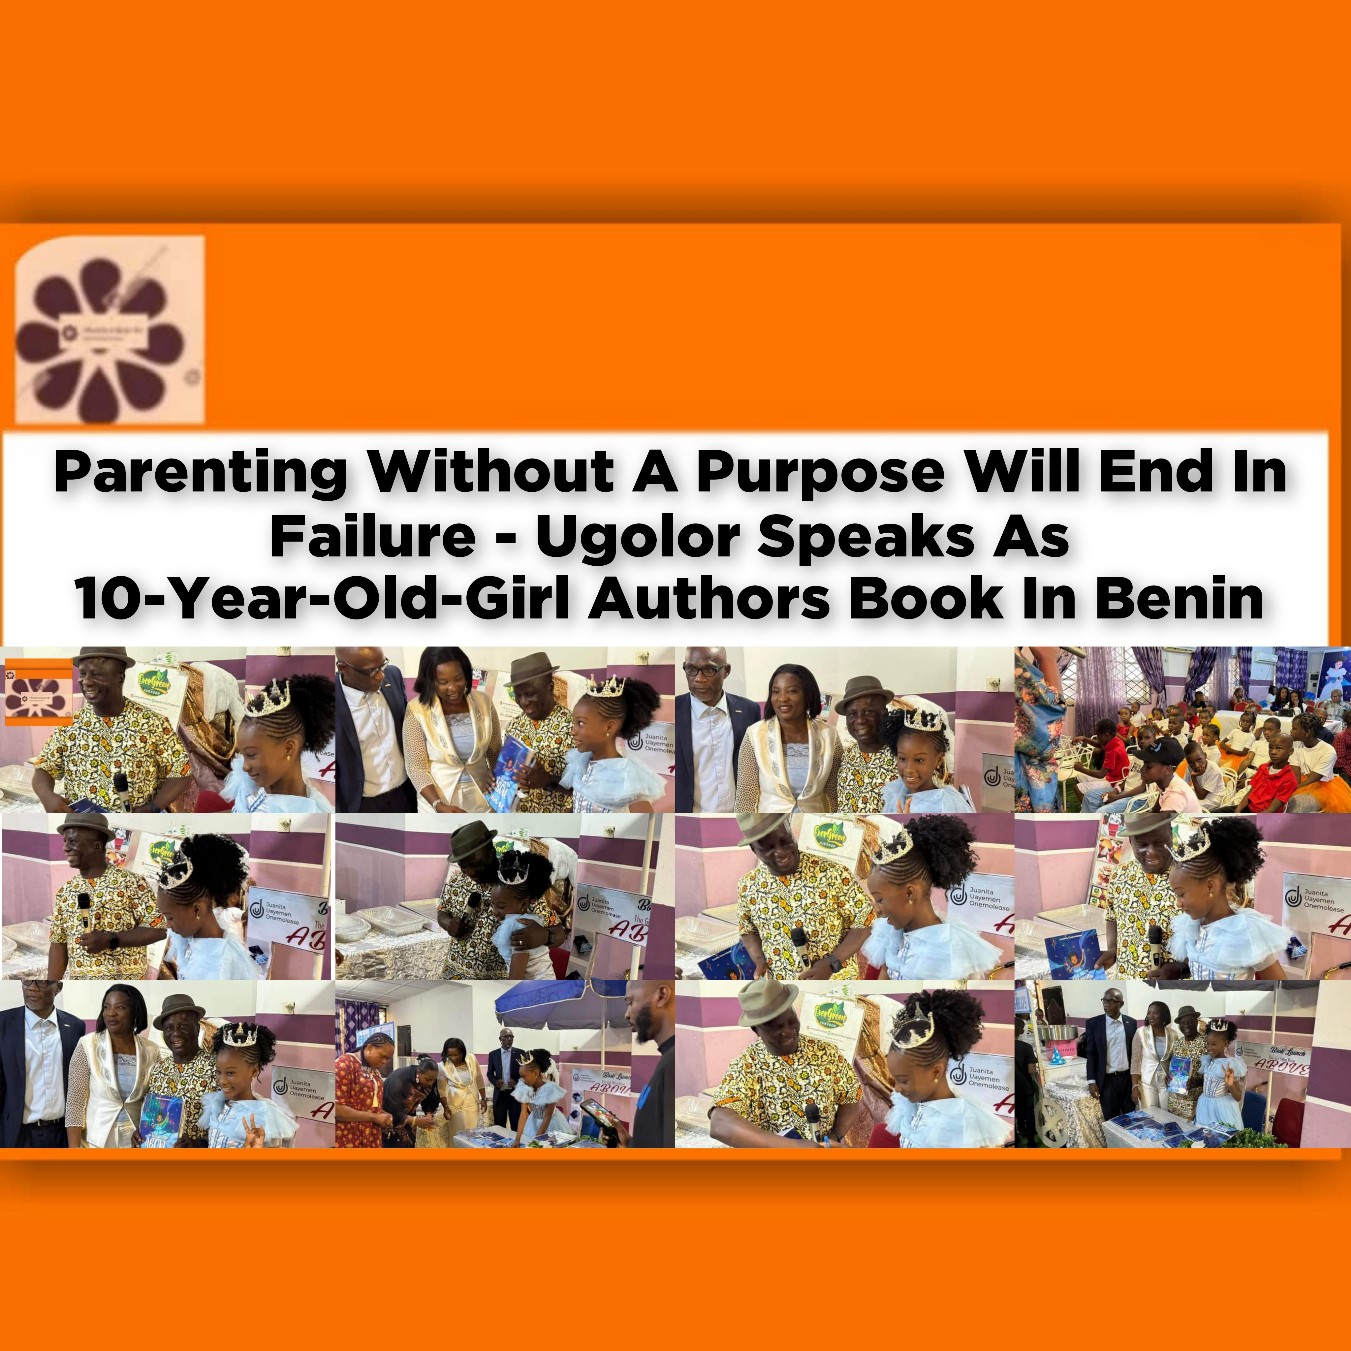 Parenting Without A Purpose Will End In Failure - Ugolor Speaks As 10-Year-Old-Girl Authors Book In Benin ~ OsazuwaAkonedo #demotes,